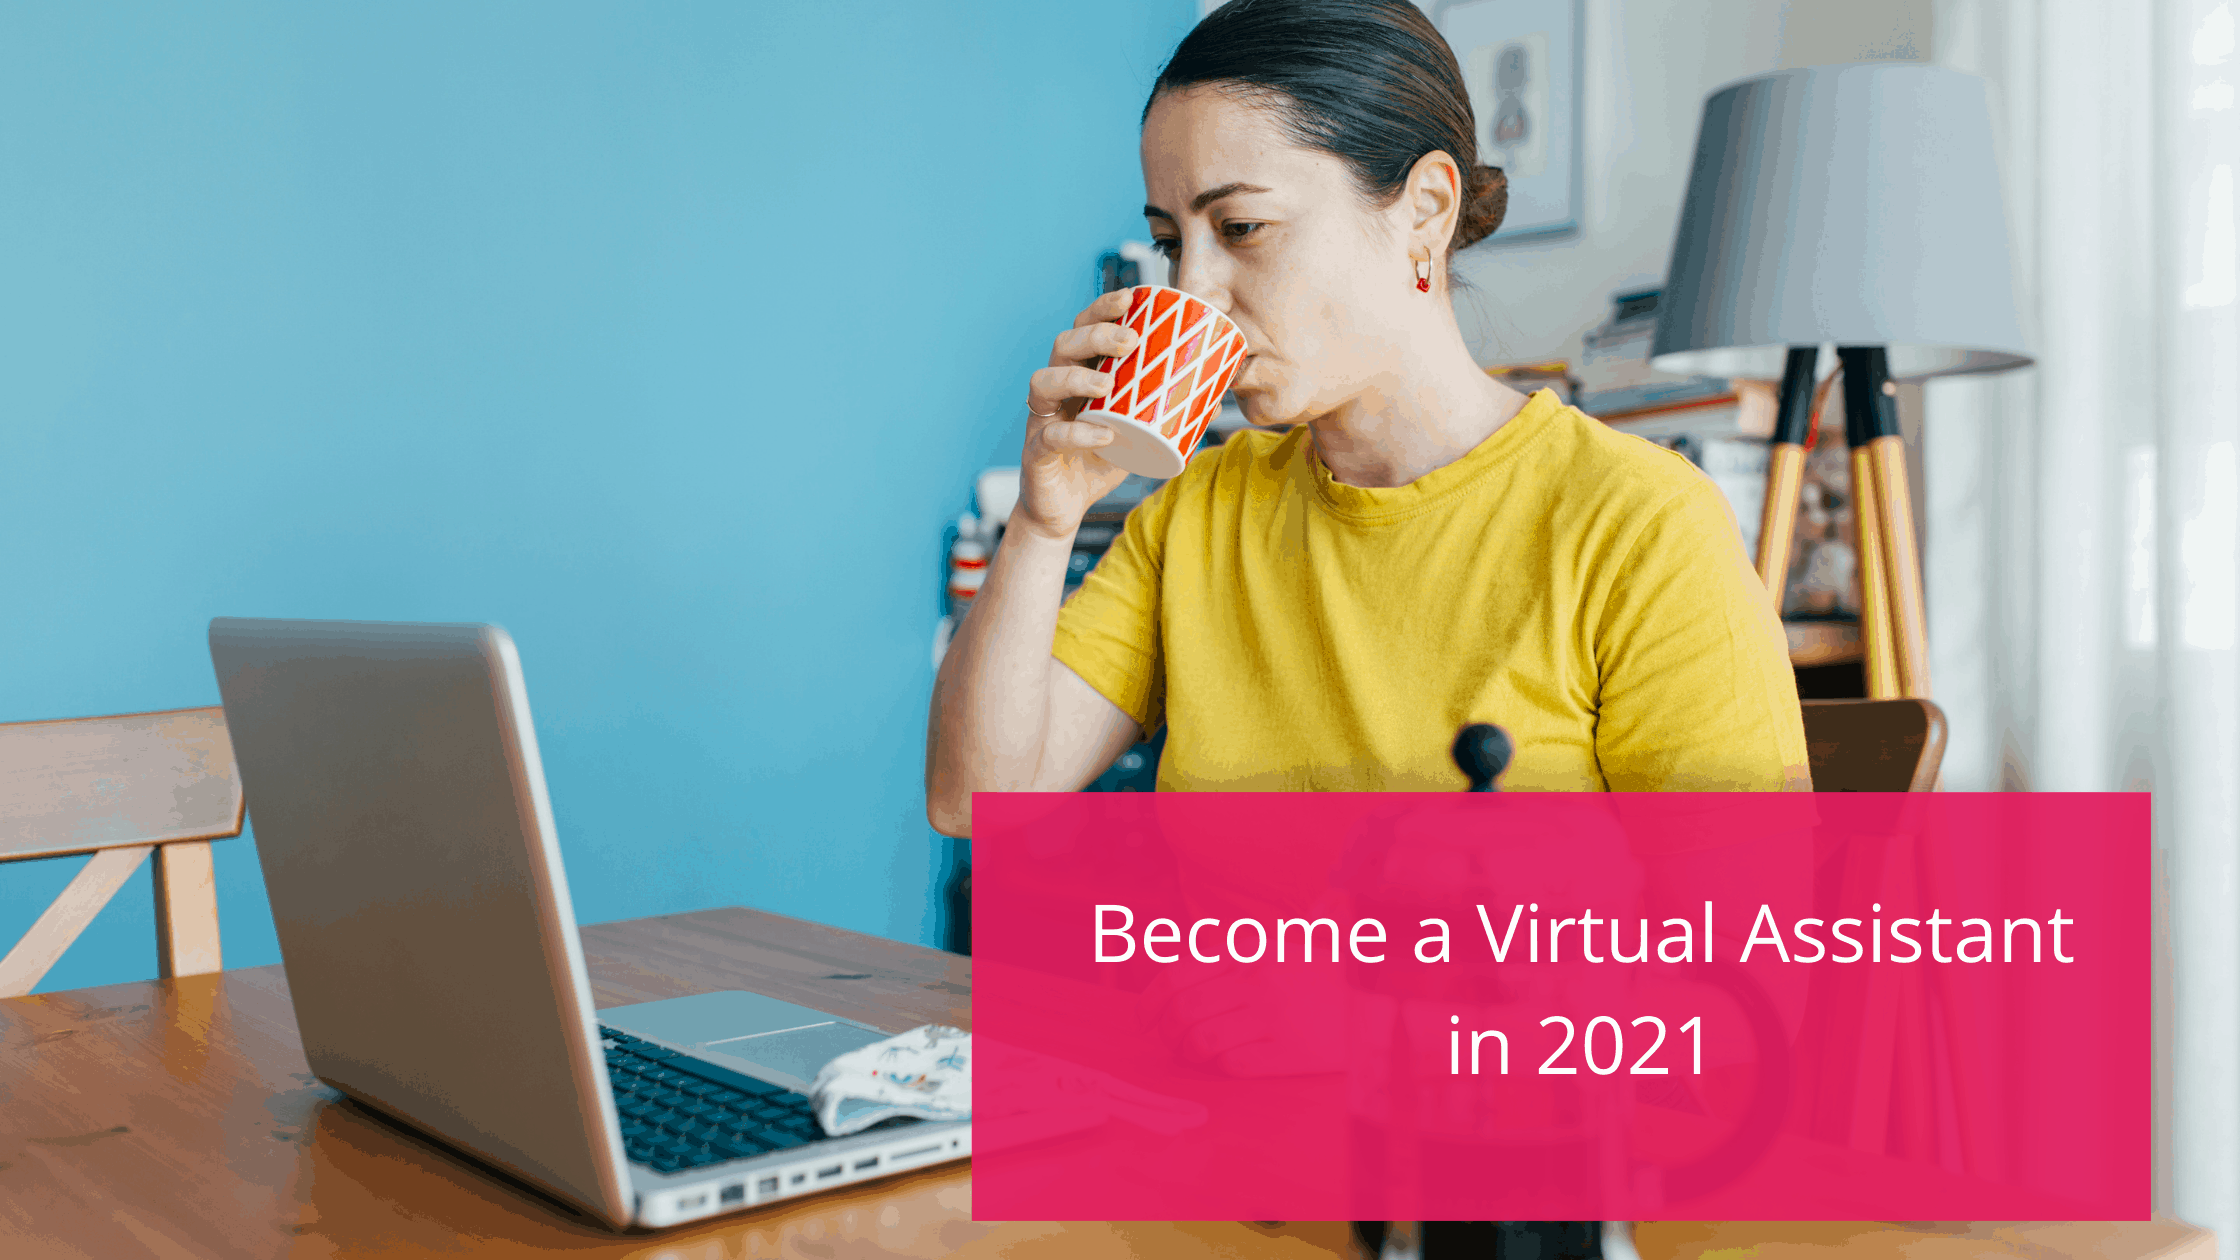 Set up as Virtual Assistant in 2021